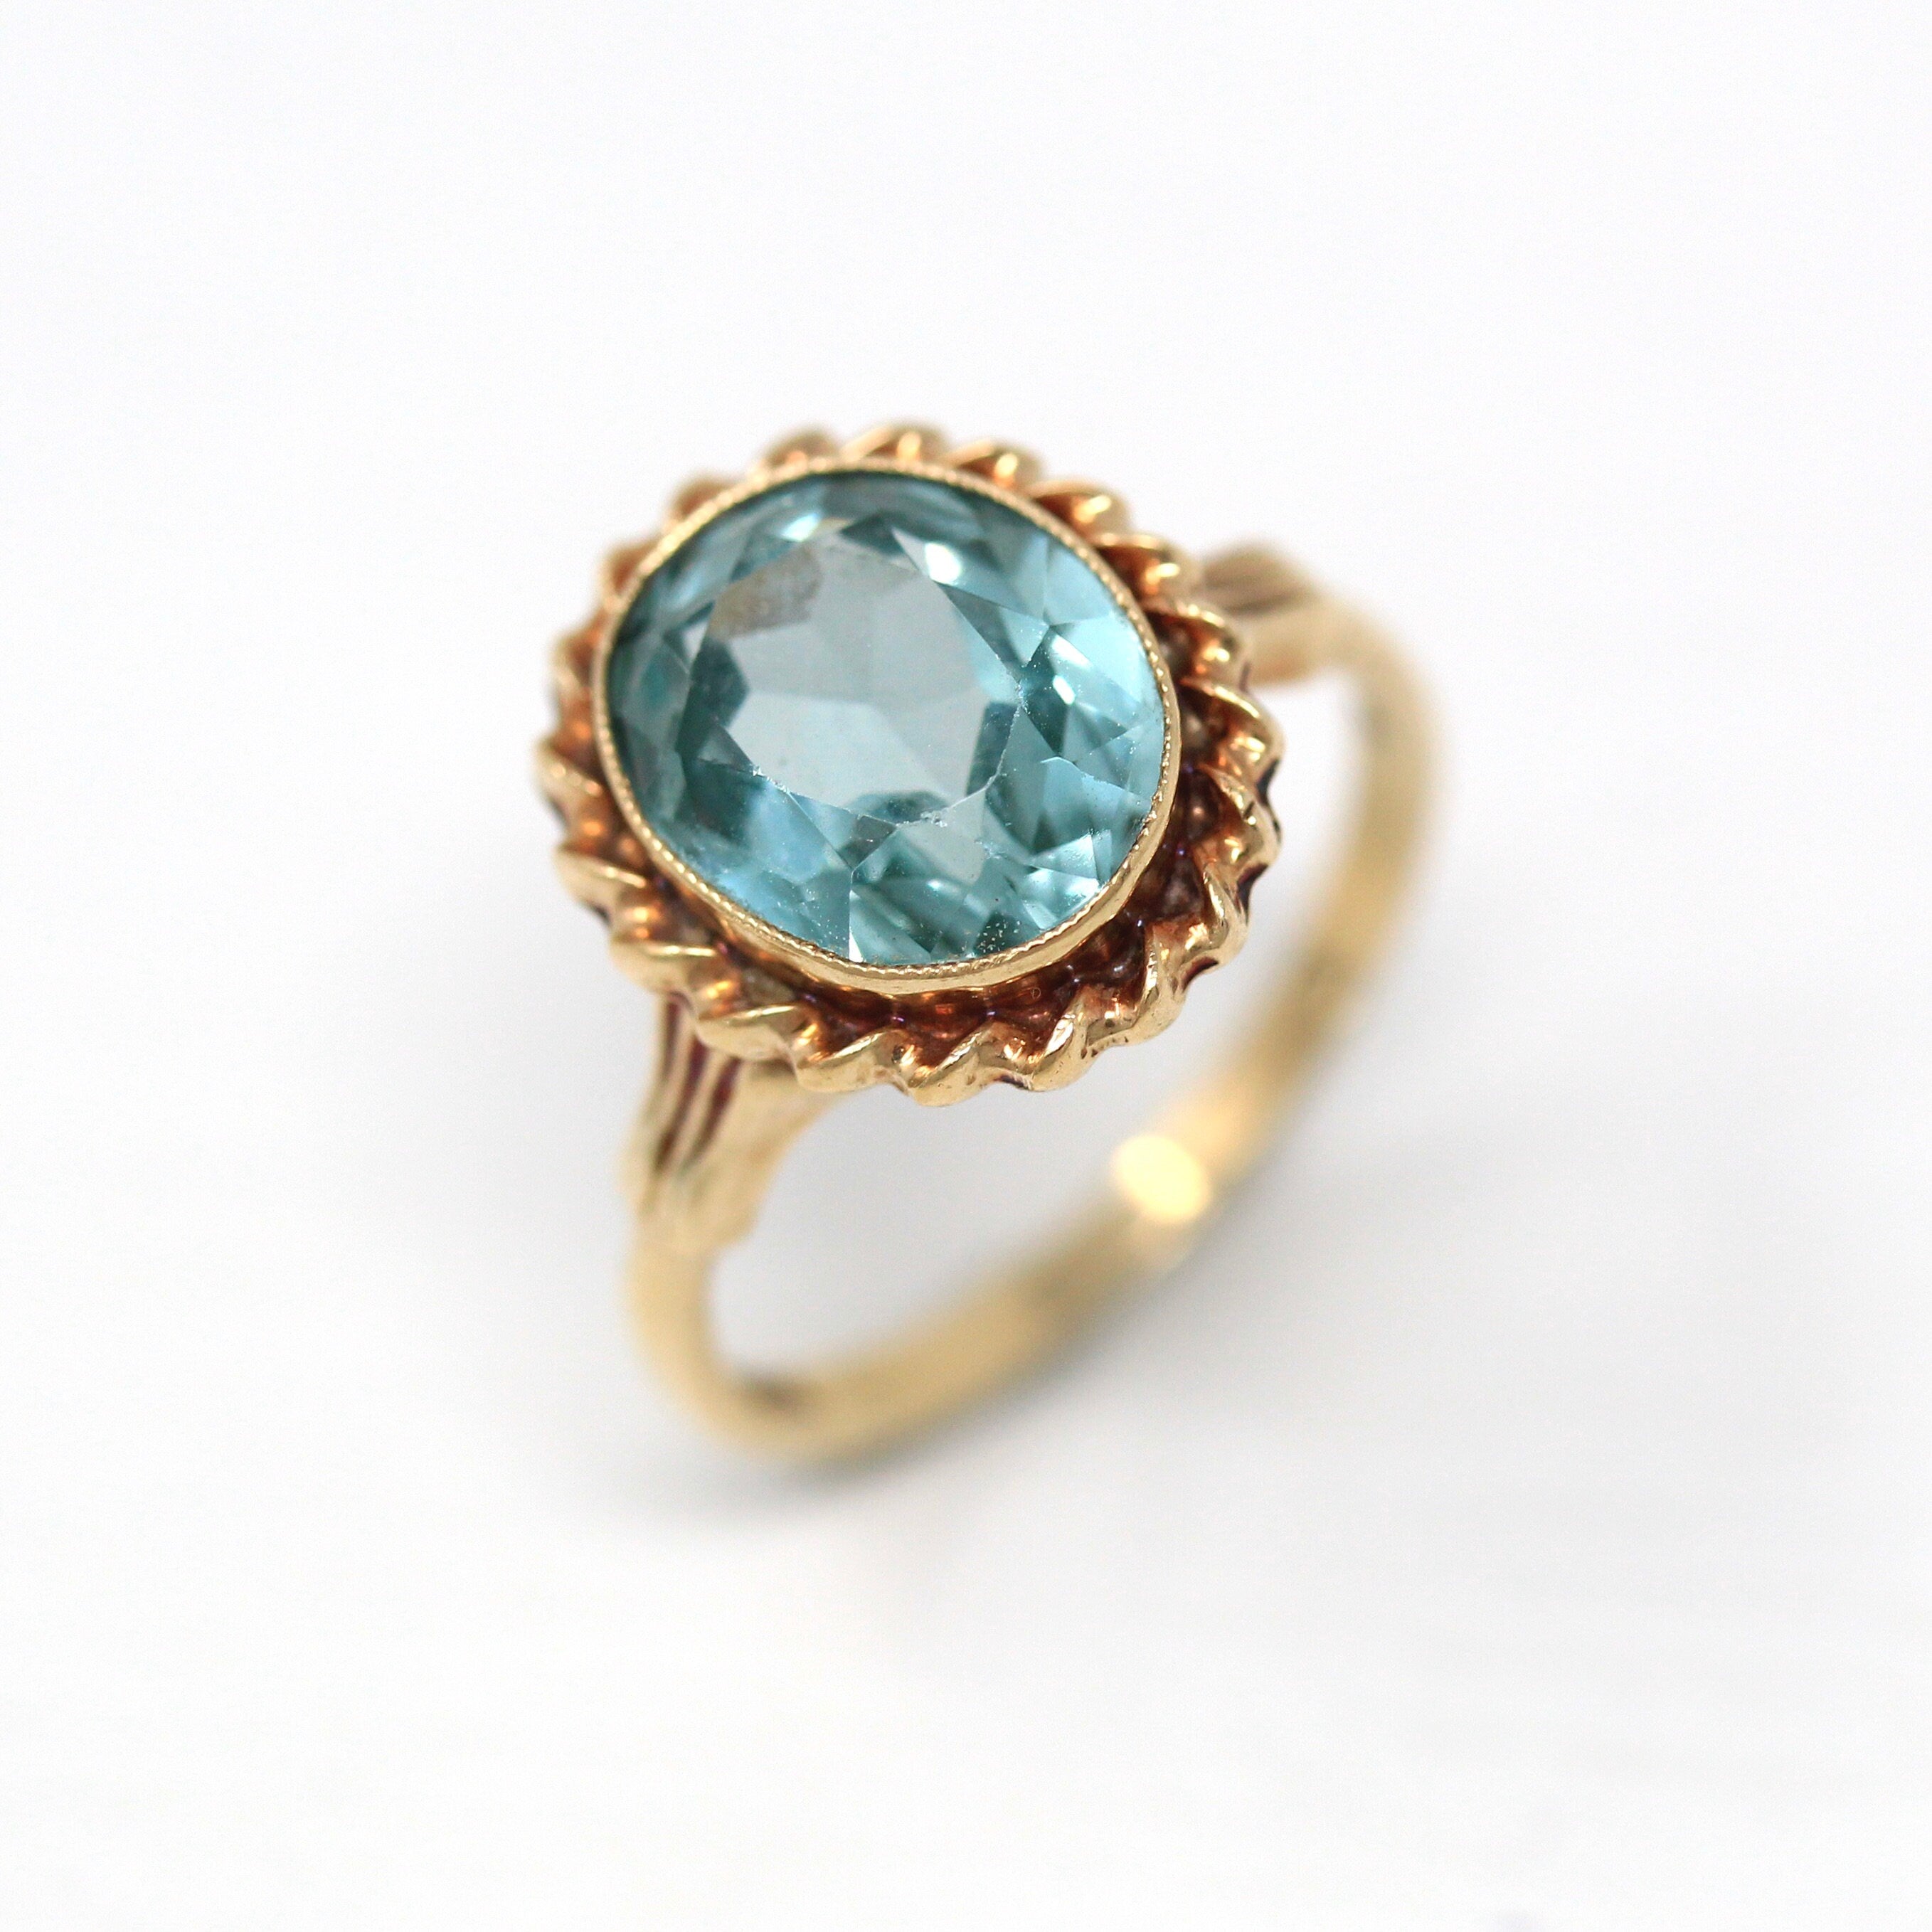 Created Spinel Ring - Retro 10k Yellow Gold Oval Faceted 3.28 CT Seafo ...